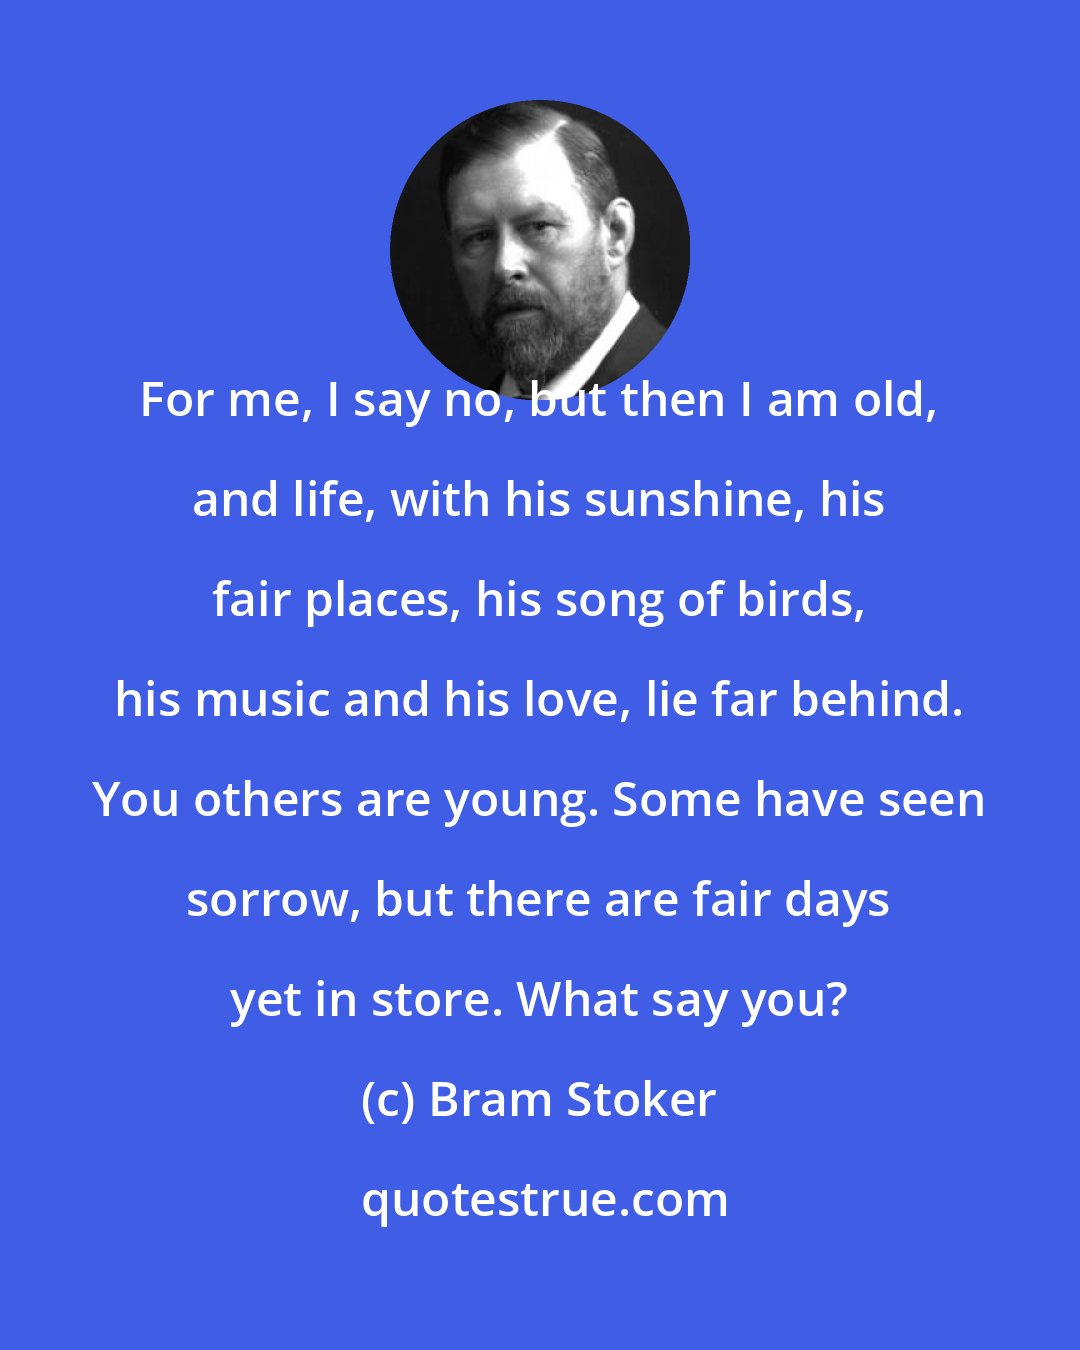 Bram Stoker: For me, I say no, but then I am old, and life, with his sunshine, his fair places, his song of birds, his music and his love, lie far behind. You others are young. Some have seen sorrow, but there are fair days yet in store. What say you?